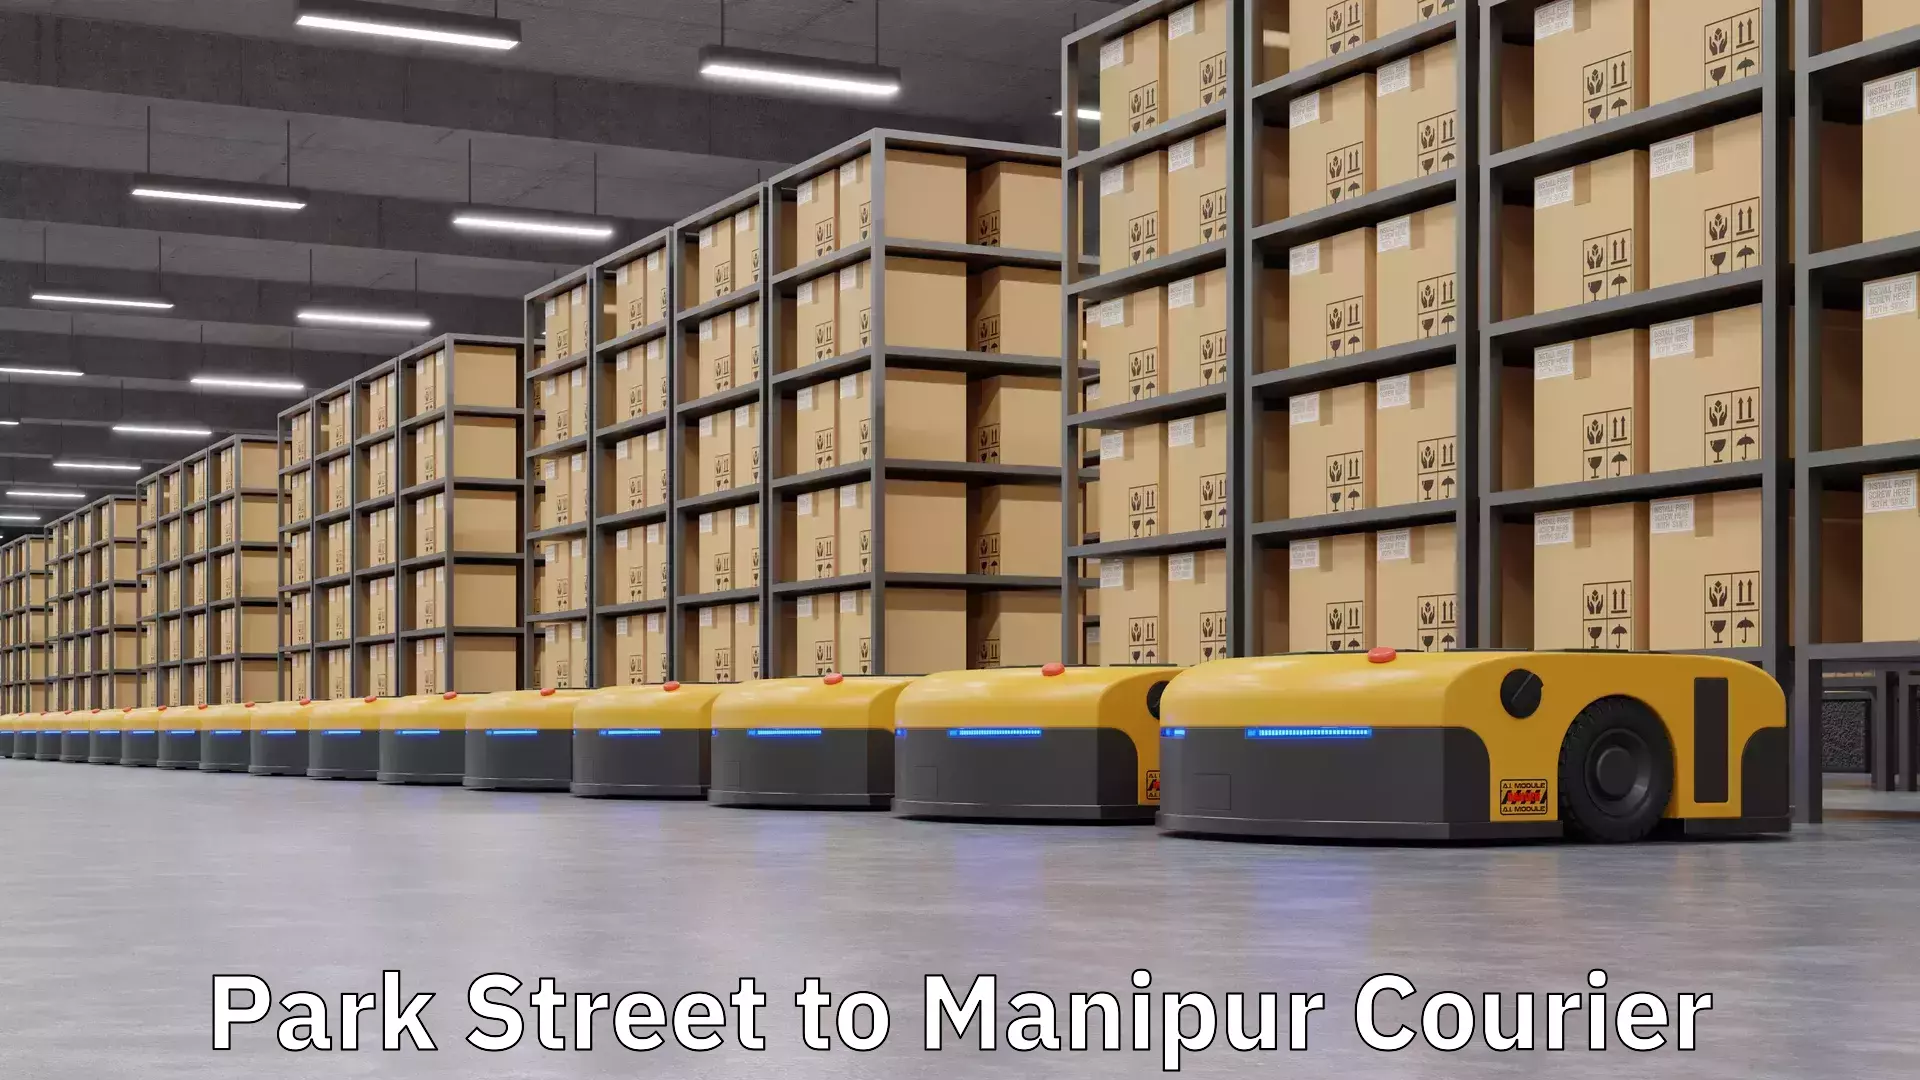 Courier service partnerships Park Street to Manipur